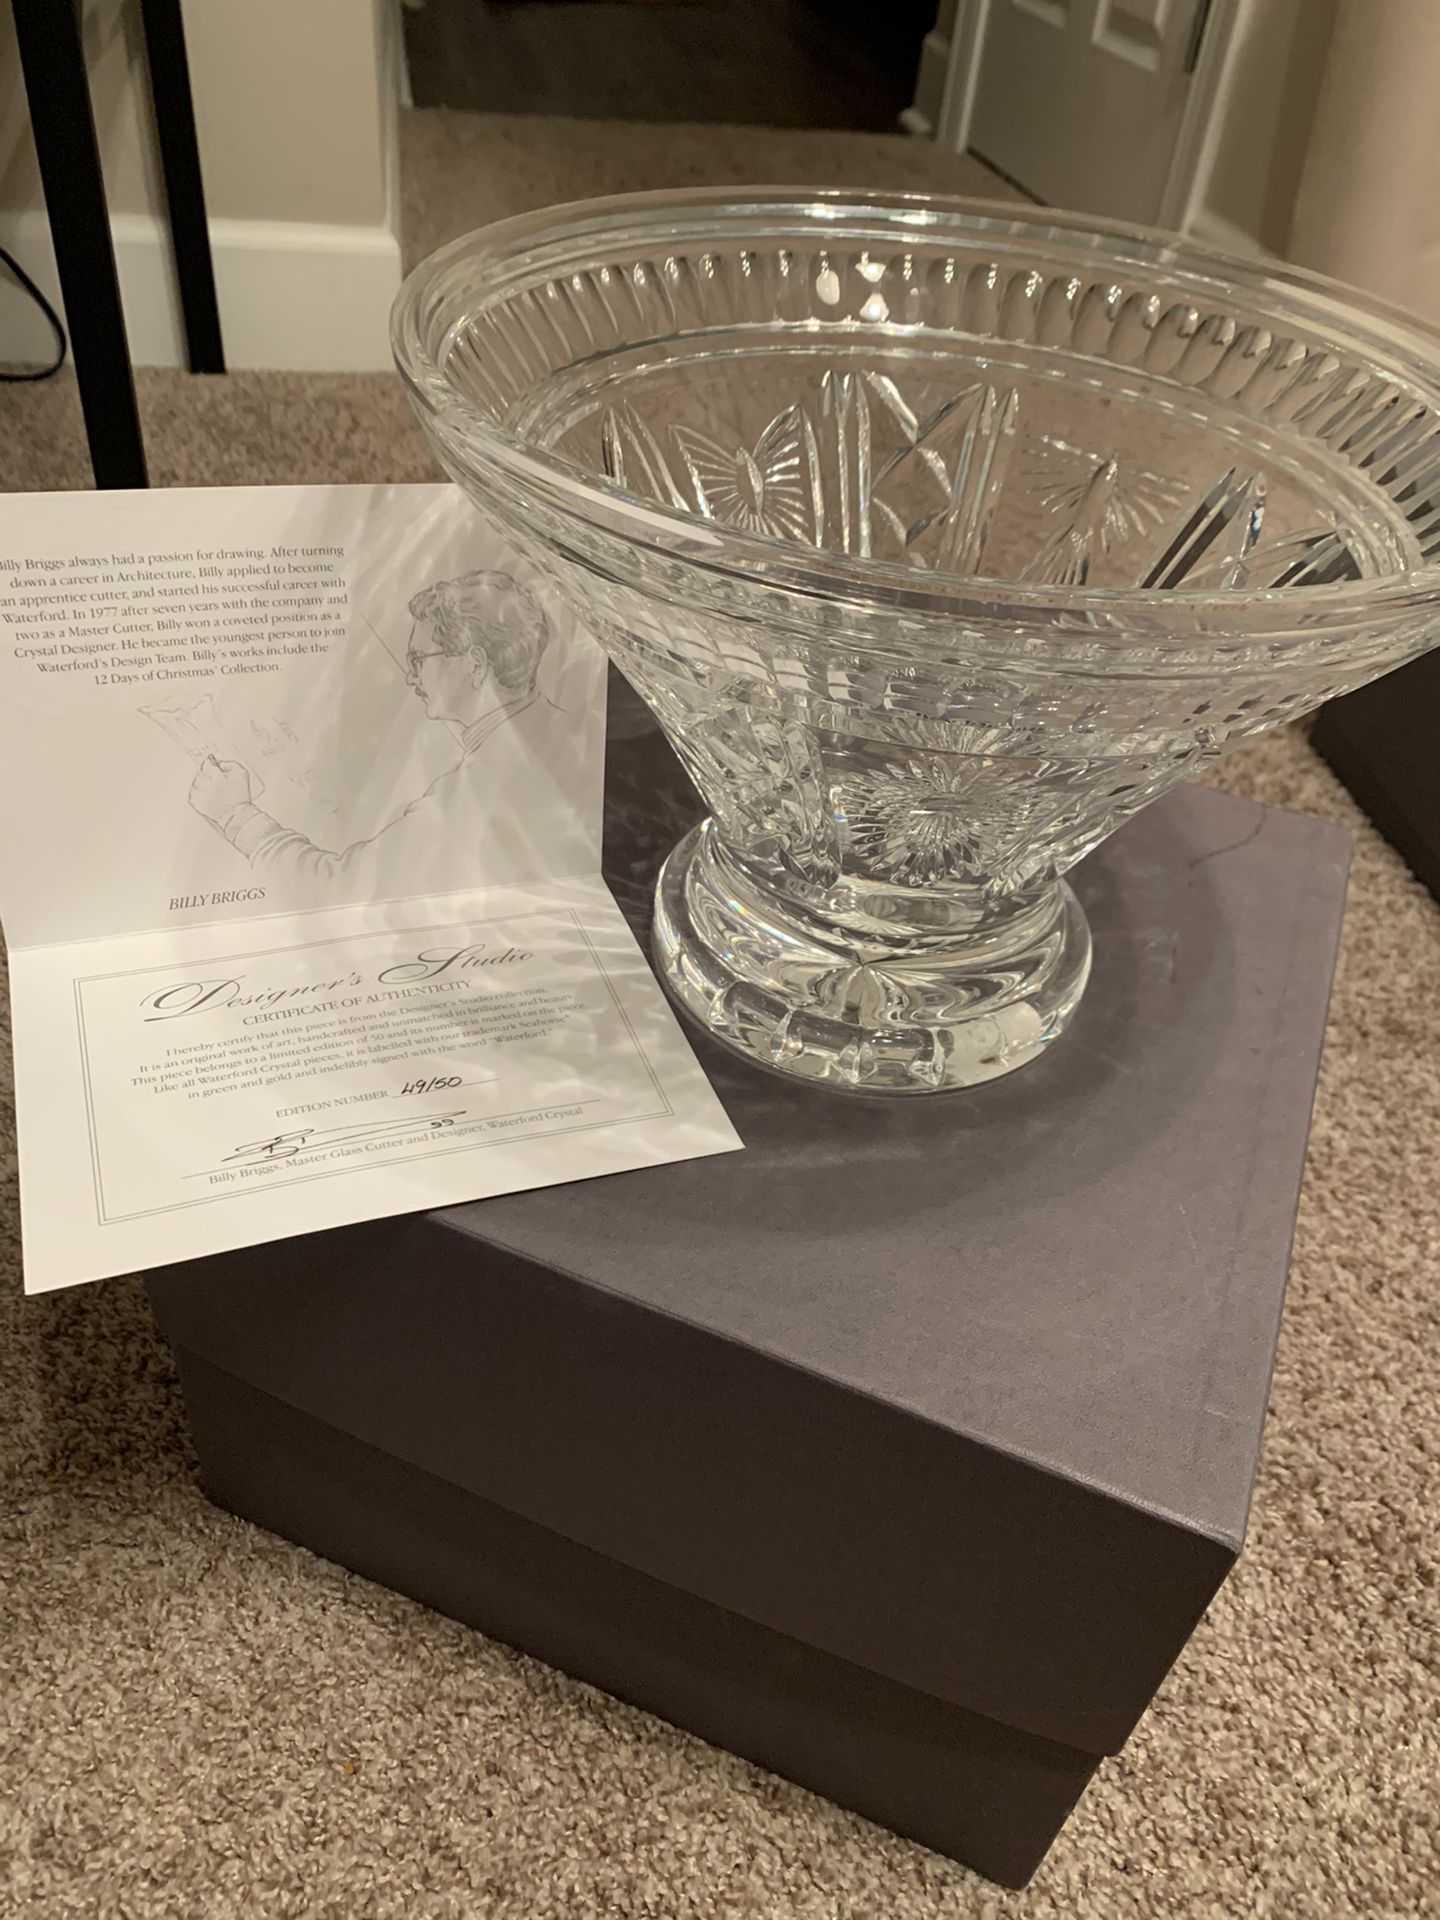 Millennium Series by WATERFORD CRYSTAL - BILLY BRIGGS DESIGN 49/50 LIMITED EDITION